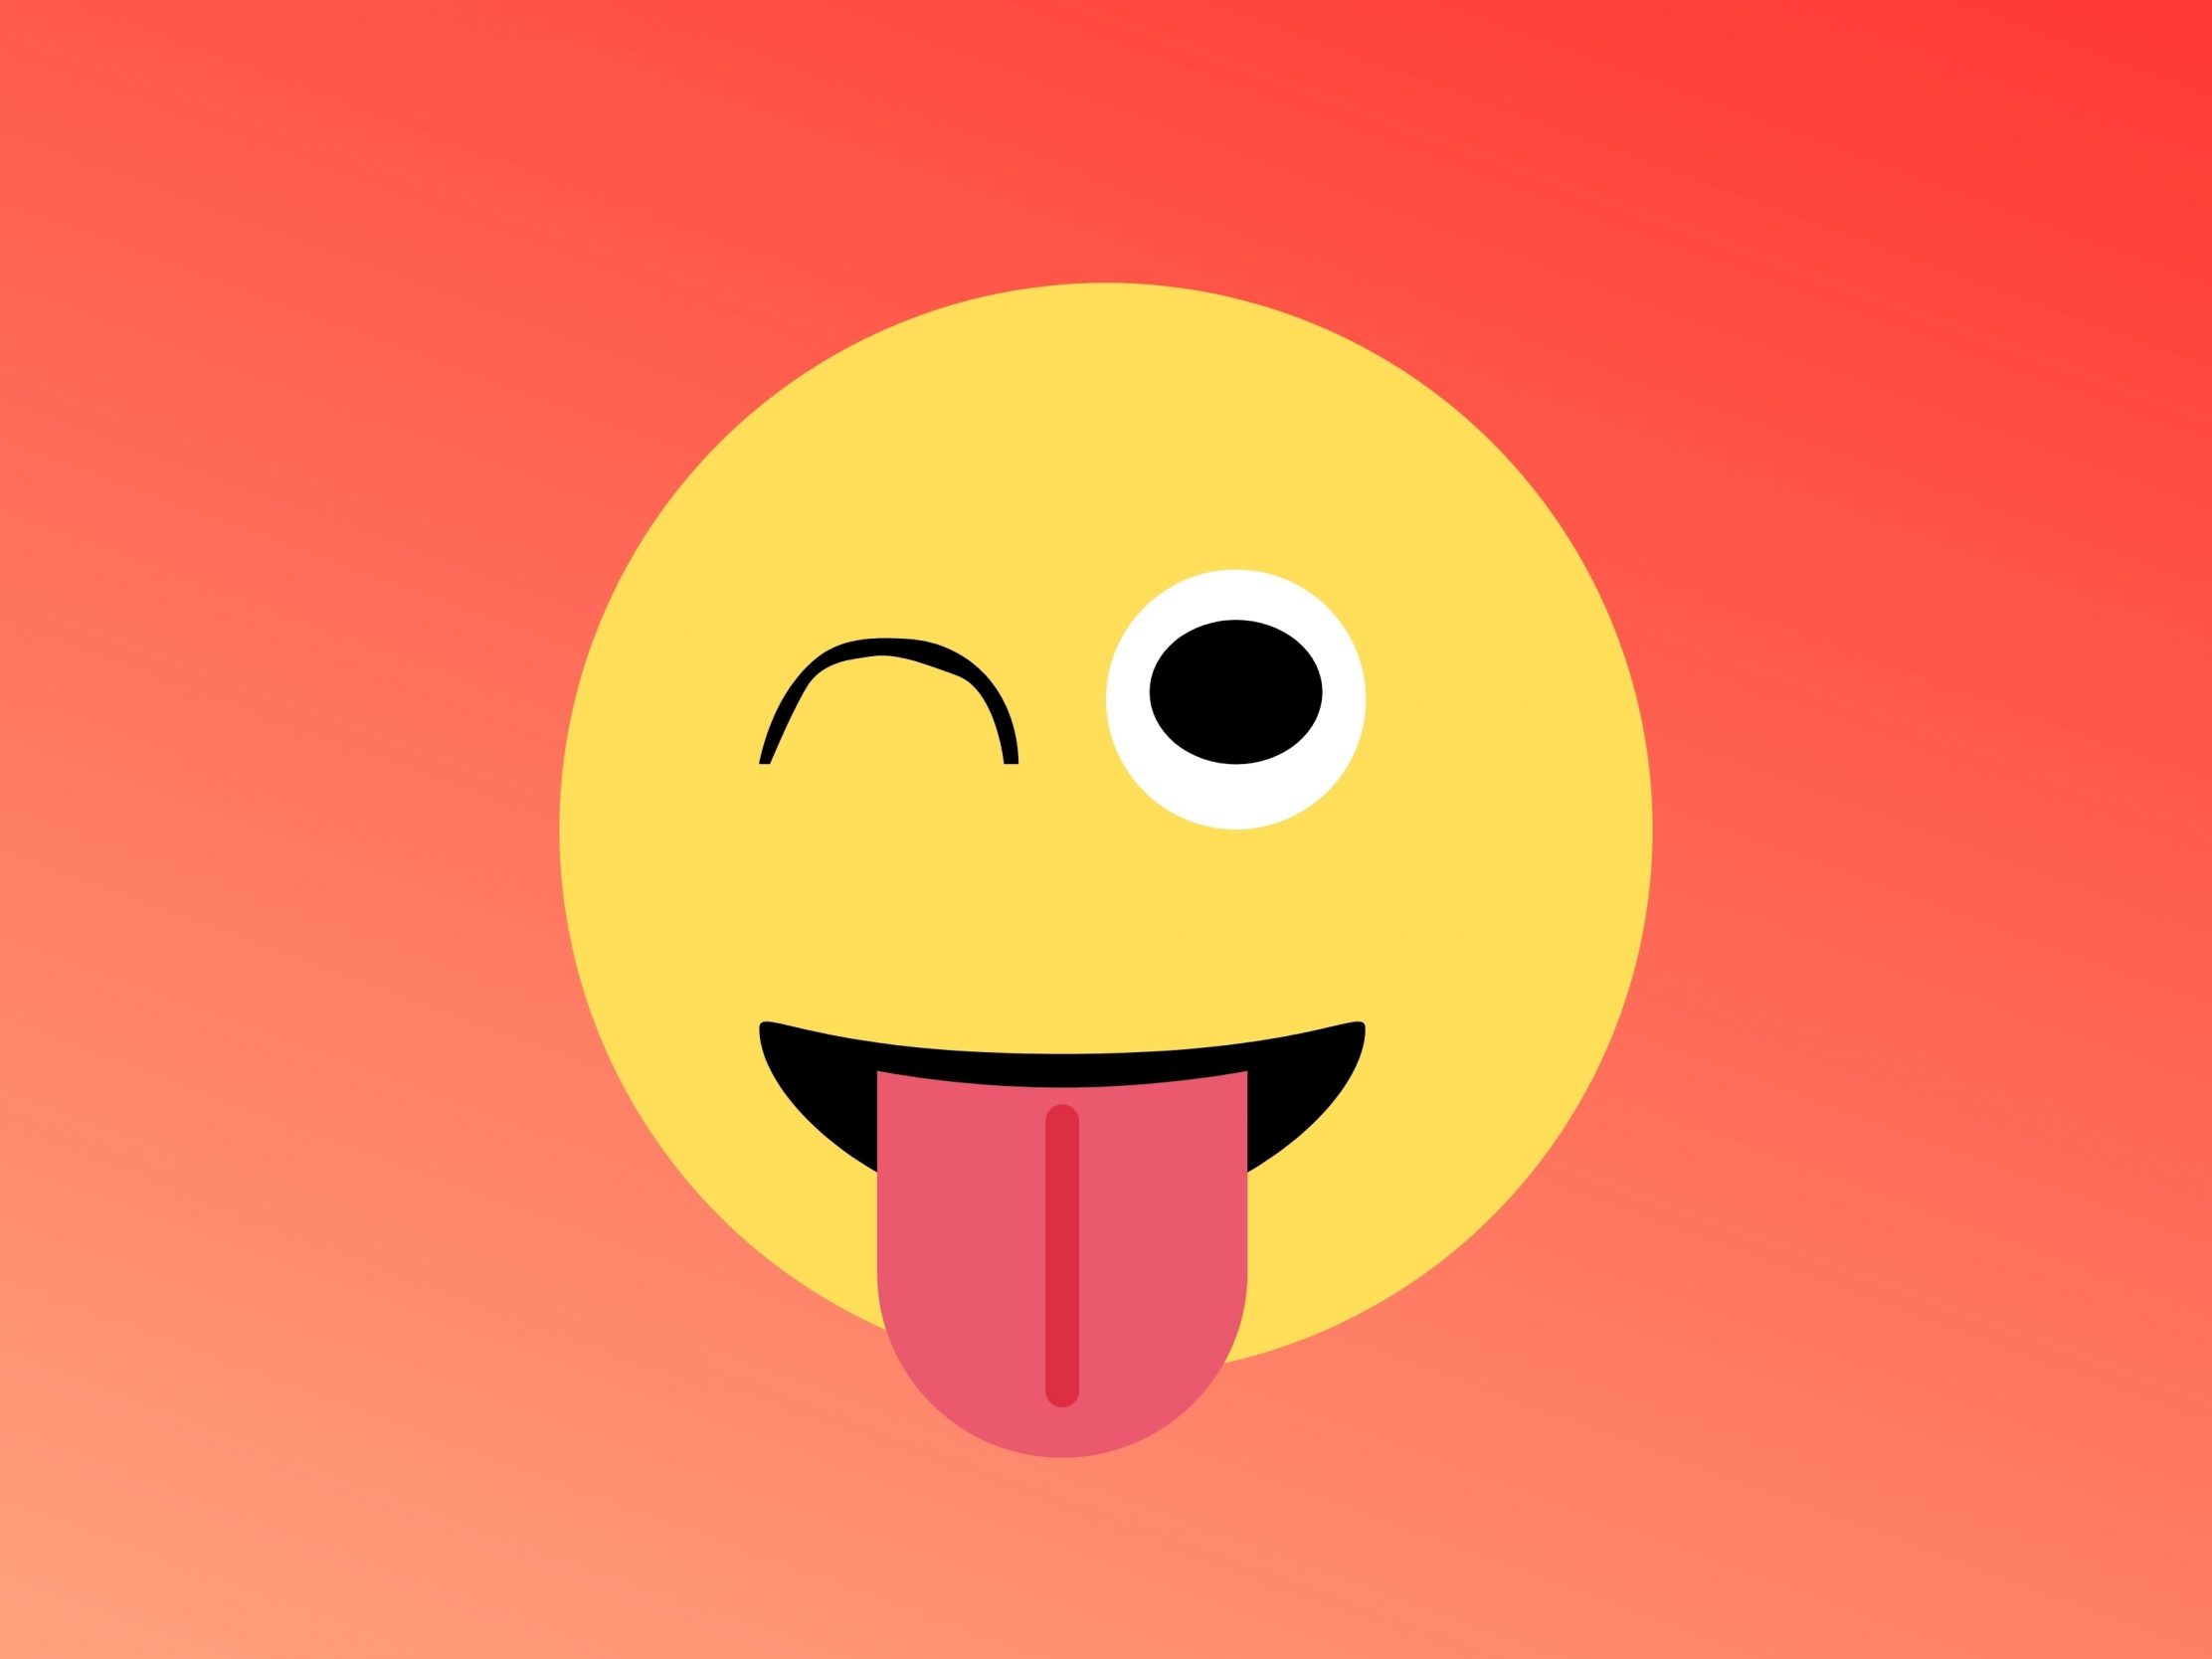 2224x1668 iPad Pro wallpapers Winking Face Tongue Red Background iPad Wallpaper 2224x1668 pixels resolution